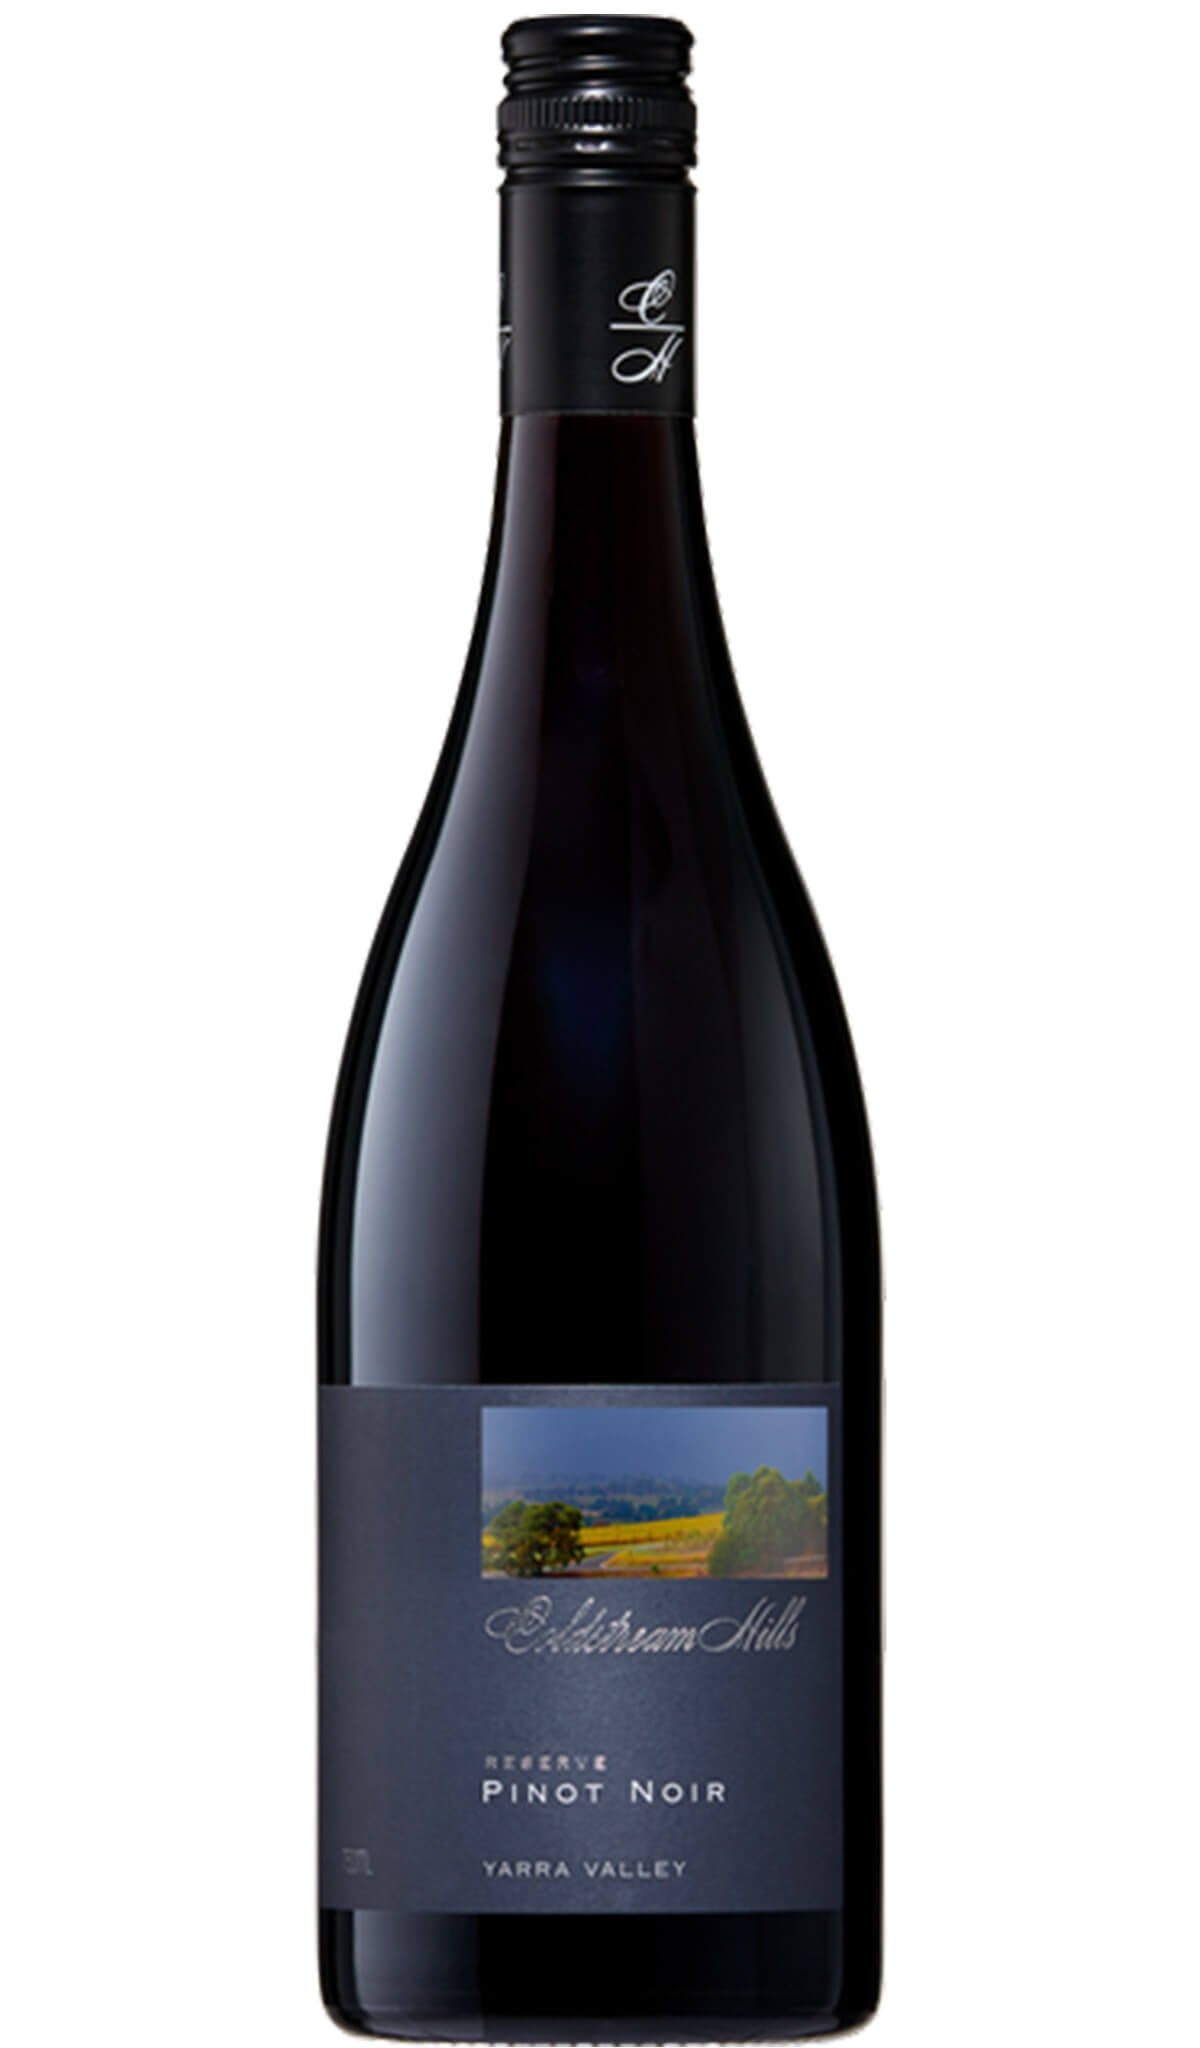 Find out more, explore the range and buy Coldstream Hills Reserve Pinot Noir 2020 (Yarra Valley) available online at Wine Sellers Direct - Australia's independent liquor specialists.